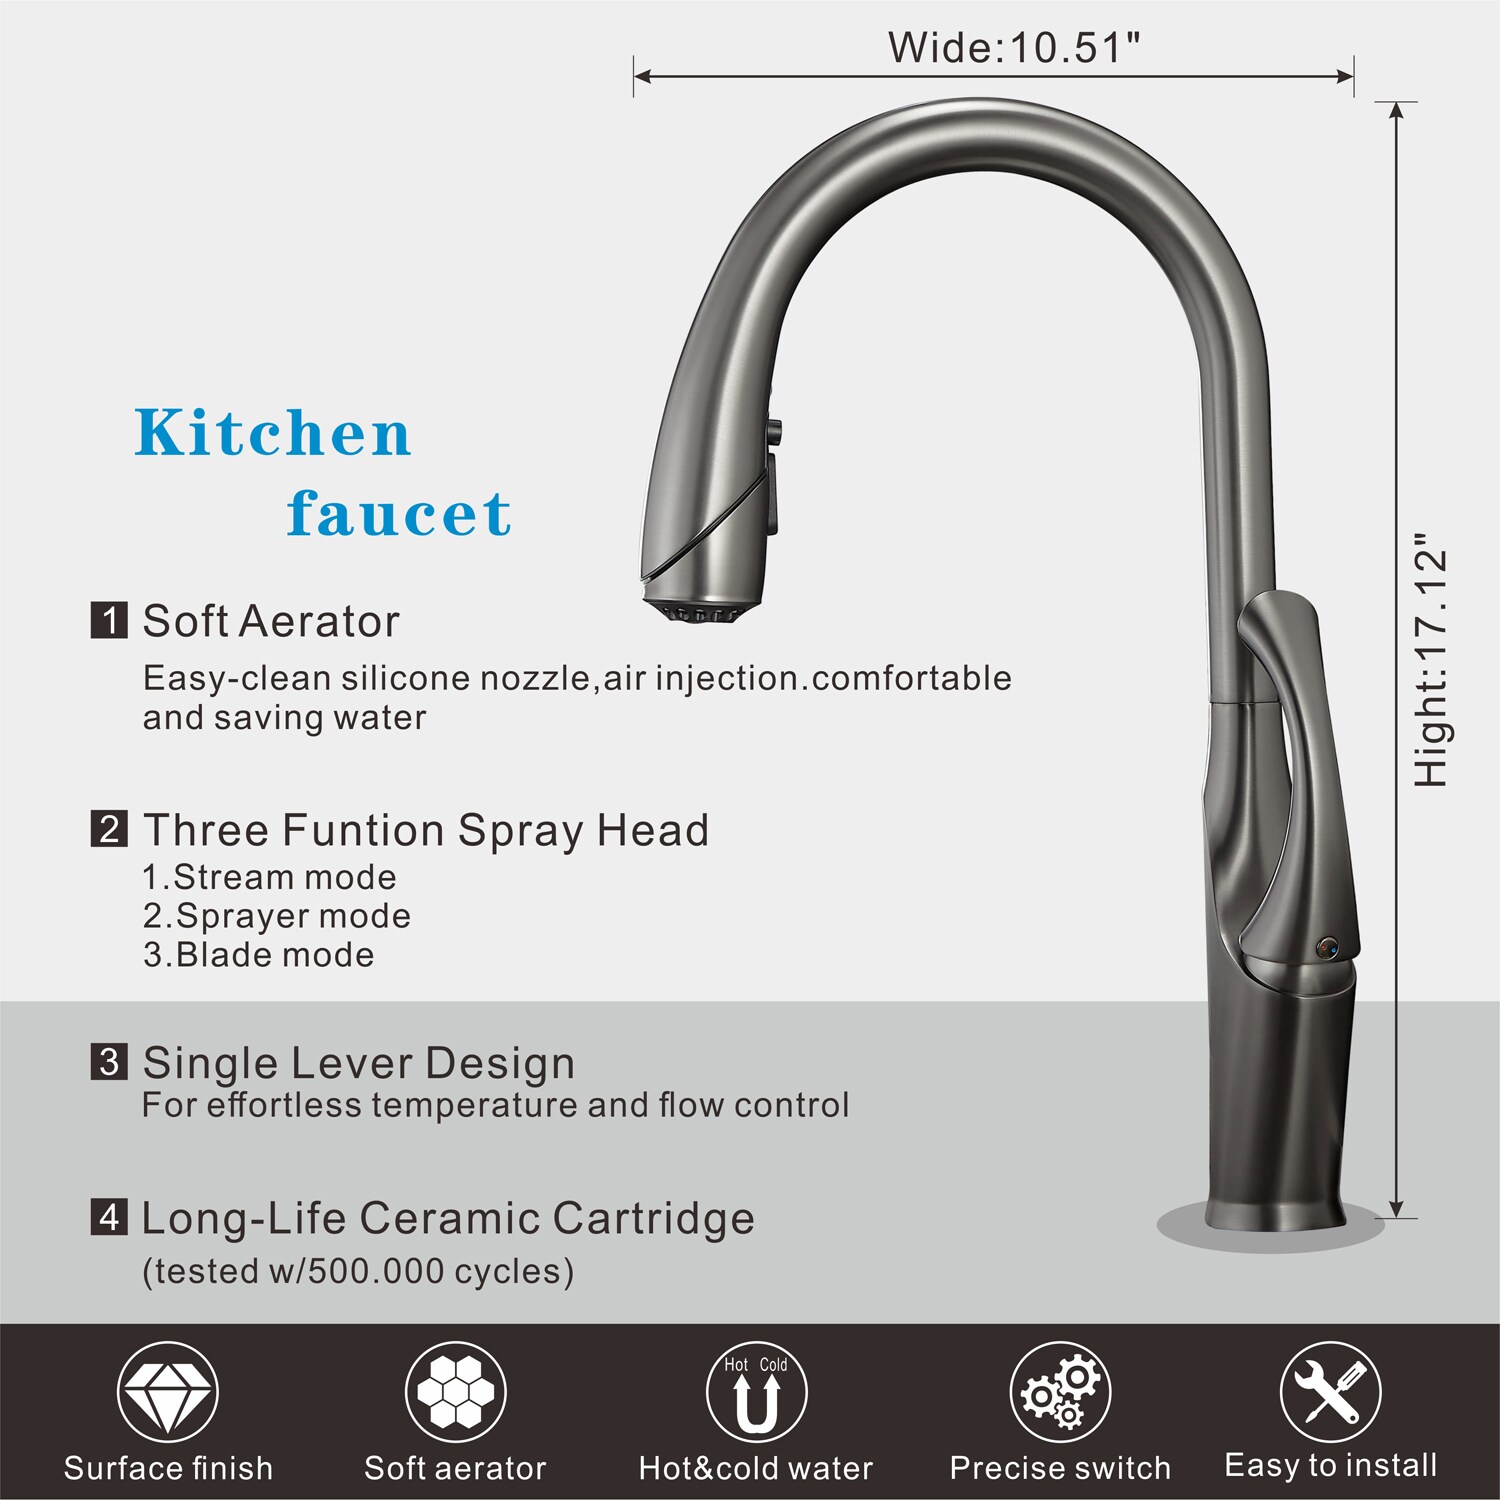 Pouuin Ob Gunmetal Single Handle Pull-down Kitchen Faucet with Sprayer Function